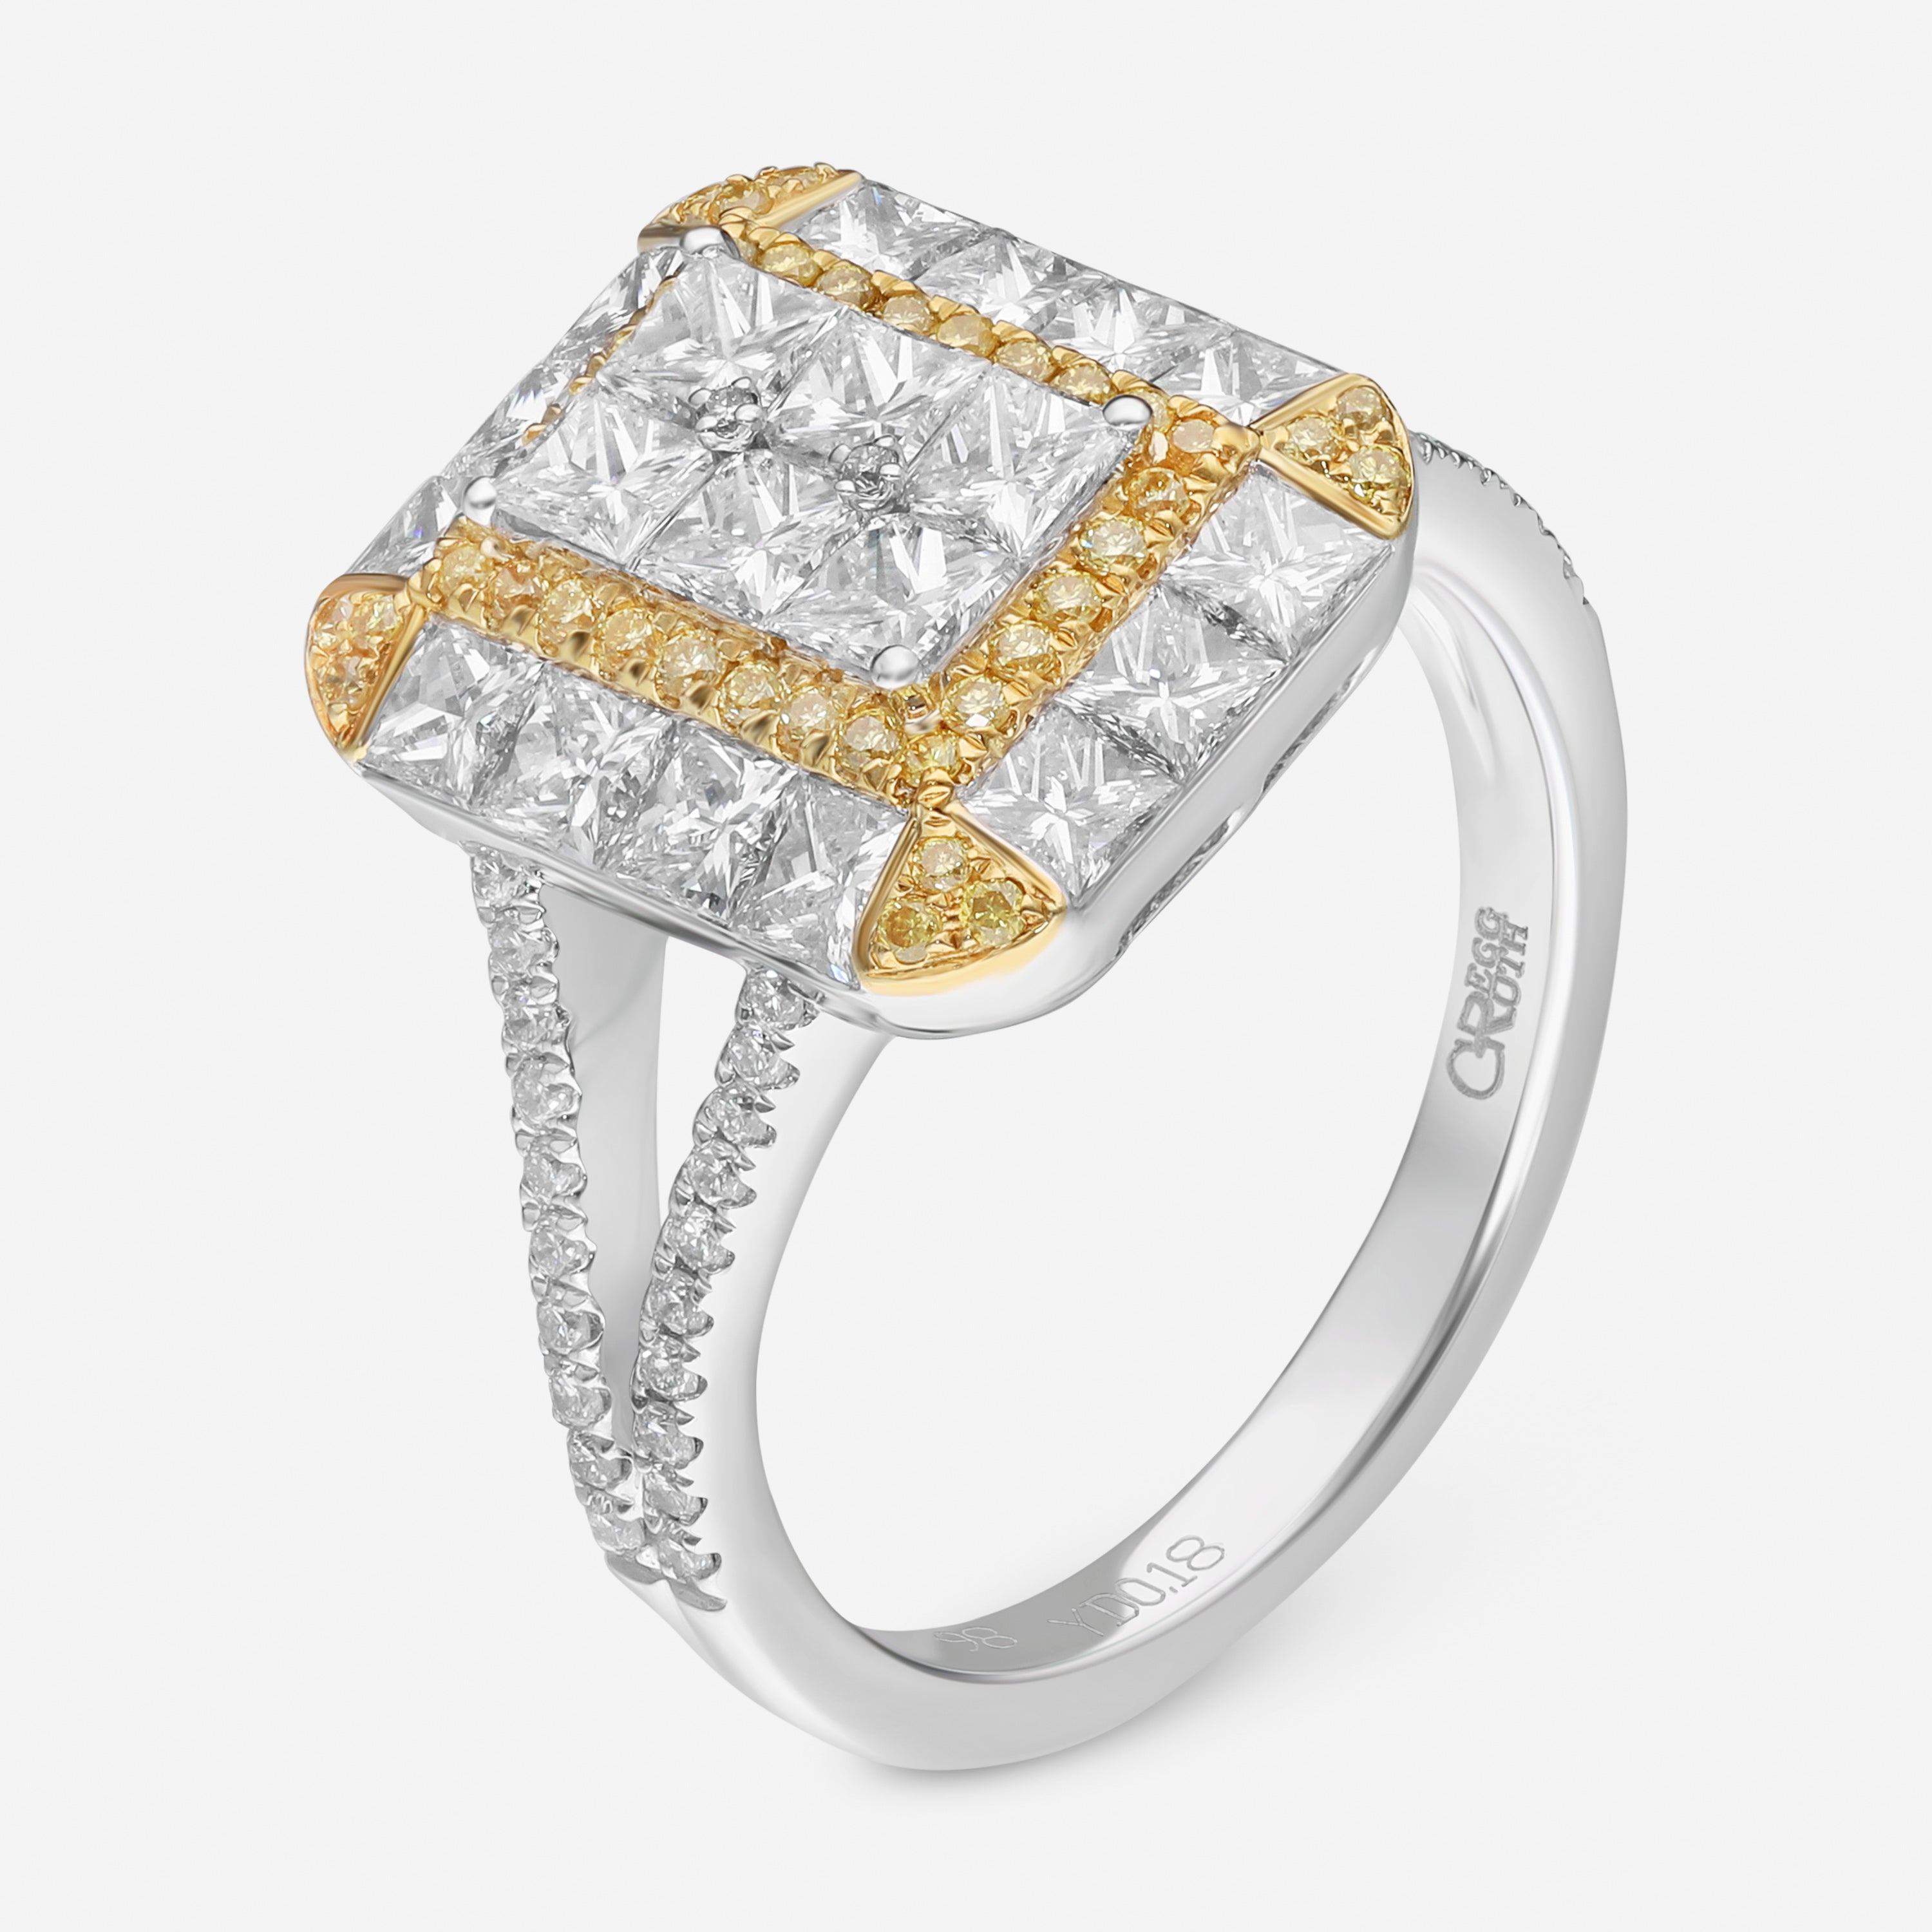 Gregg Ruth 18K Gold, White Diamond 1.97ct. tw. and Fancy Yellow Diamond Engagement Ring Sz. 6.5 605259 - THE SOLIST